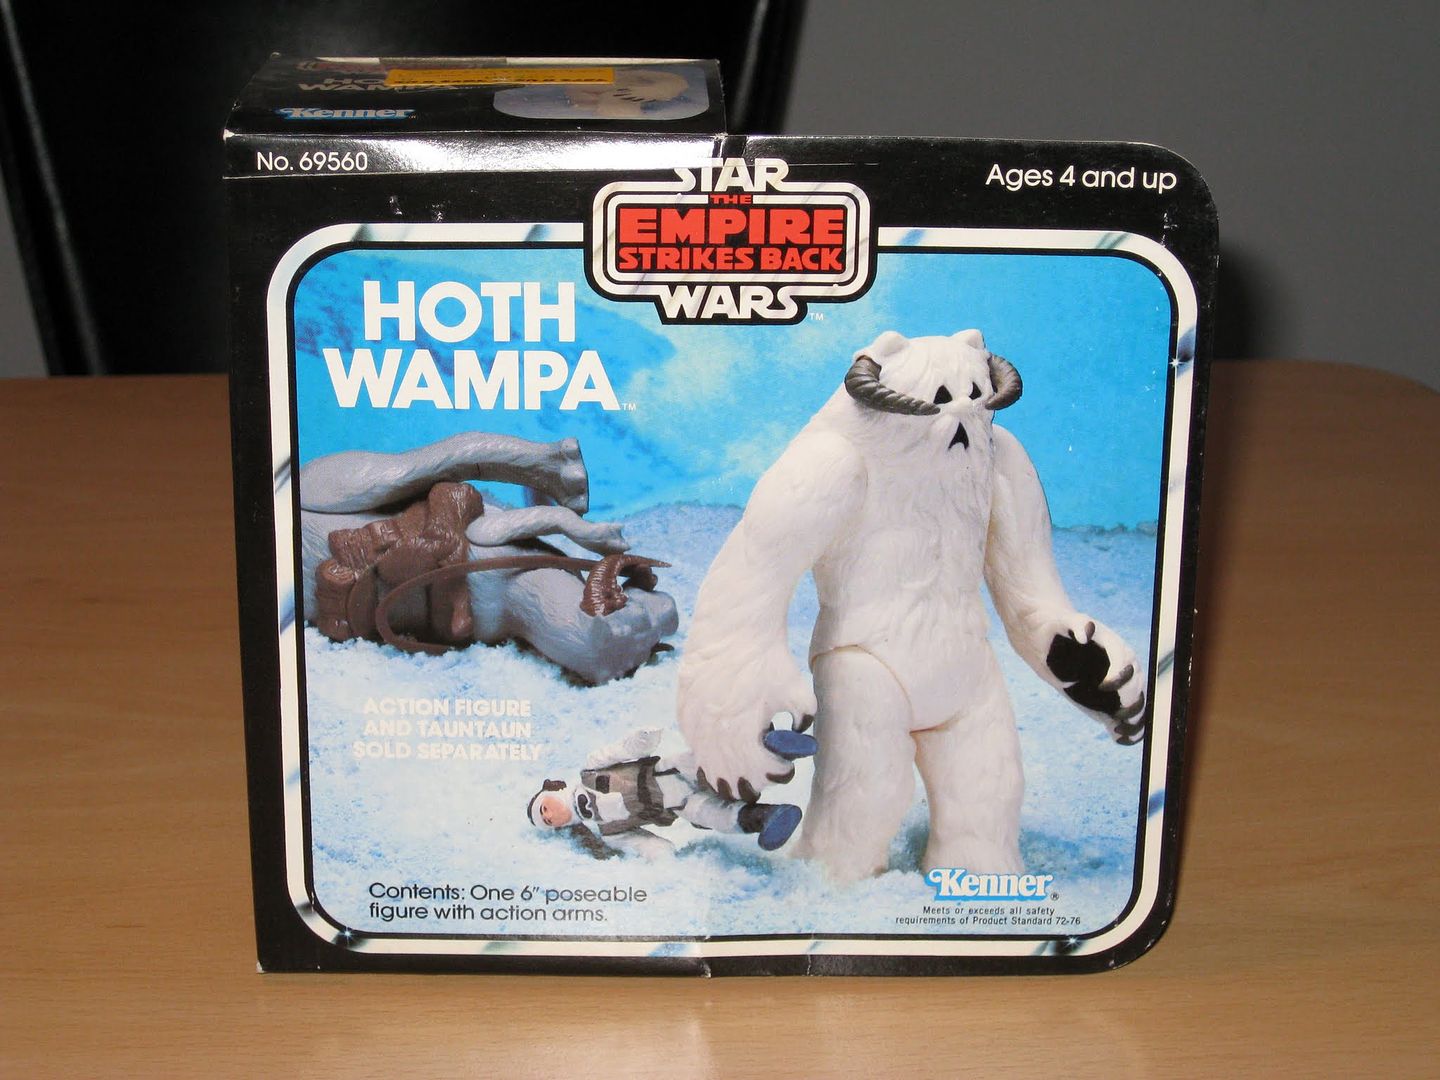 PROJECT OUTSIDE THE BOX - Star Wars Vehicles, Playsets, Mini Rigs & other boxed products  - Page 4 Sw_hoth_wampa_misb_esb_kenner002